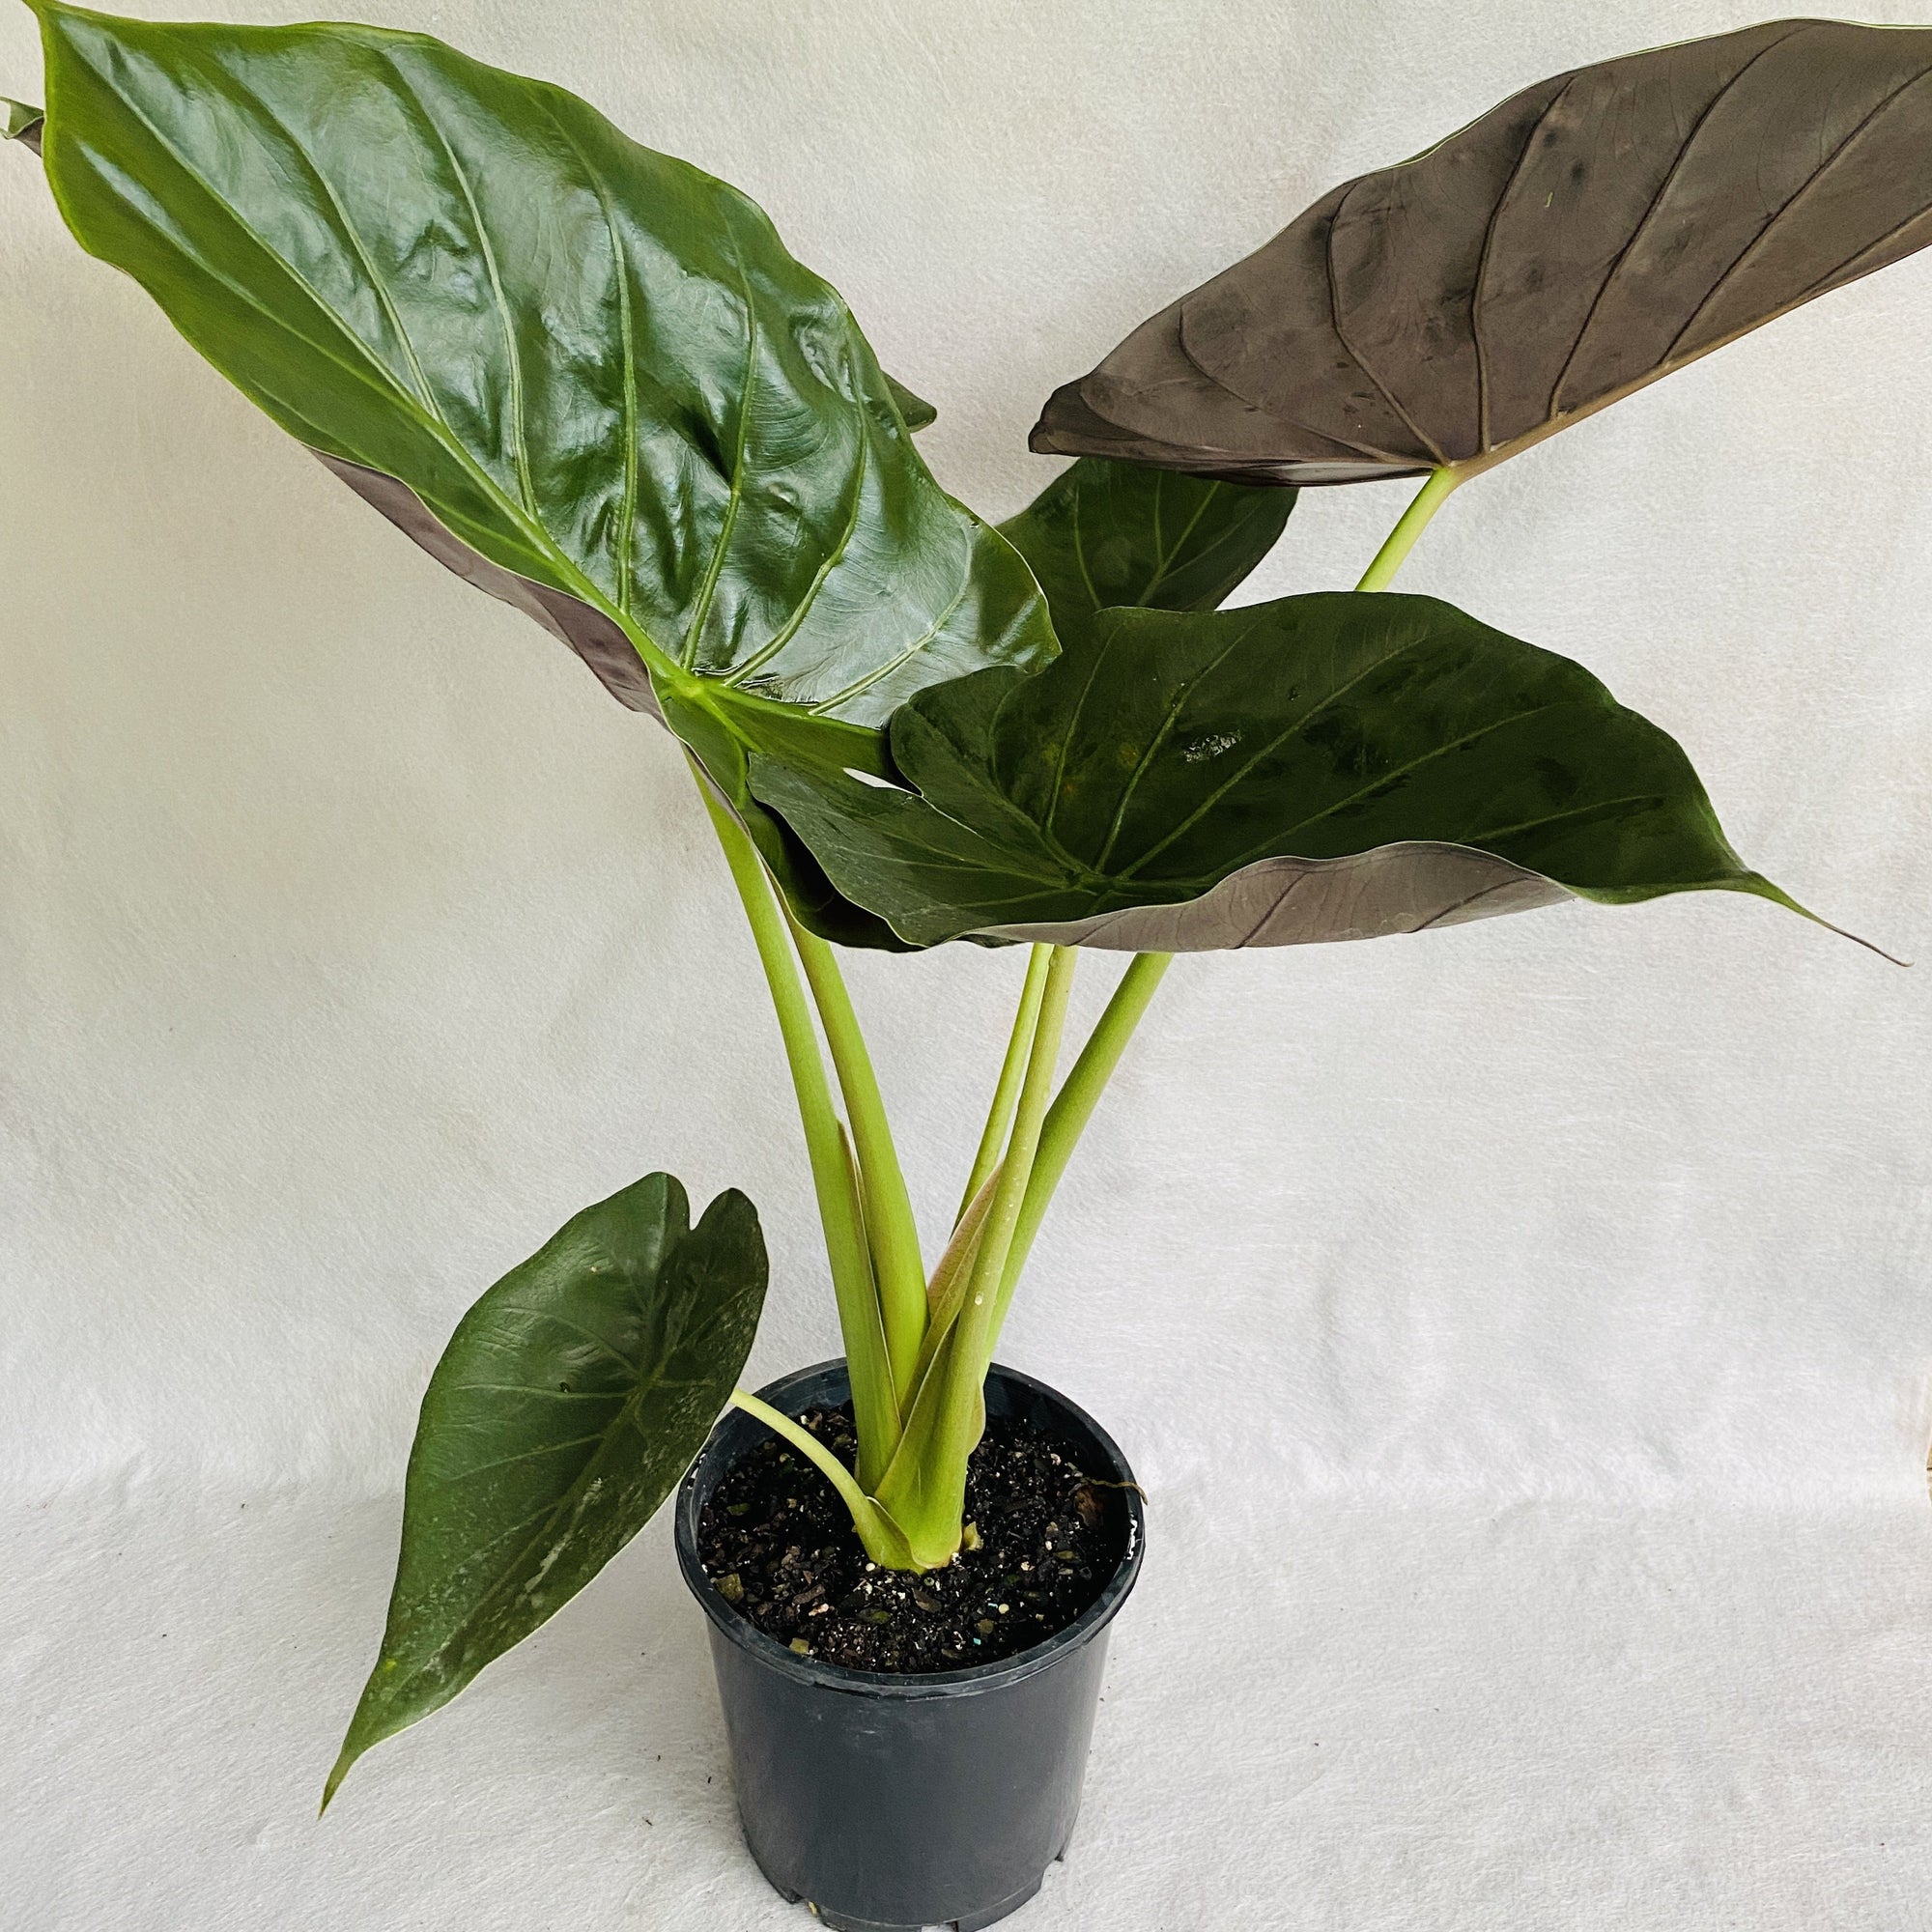 Alocasia Wentii is an evergreen perennial with large green leaves with metallic purple undersides.